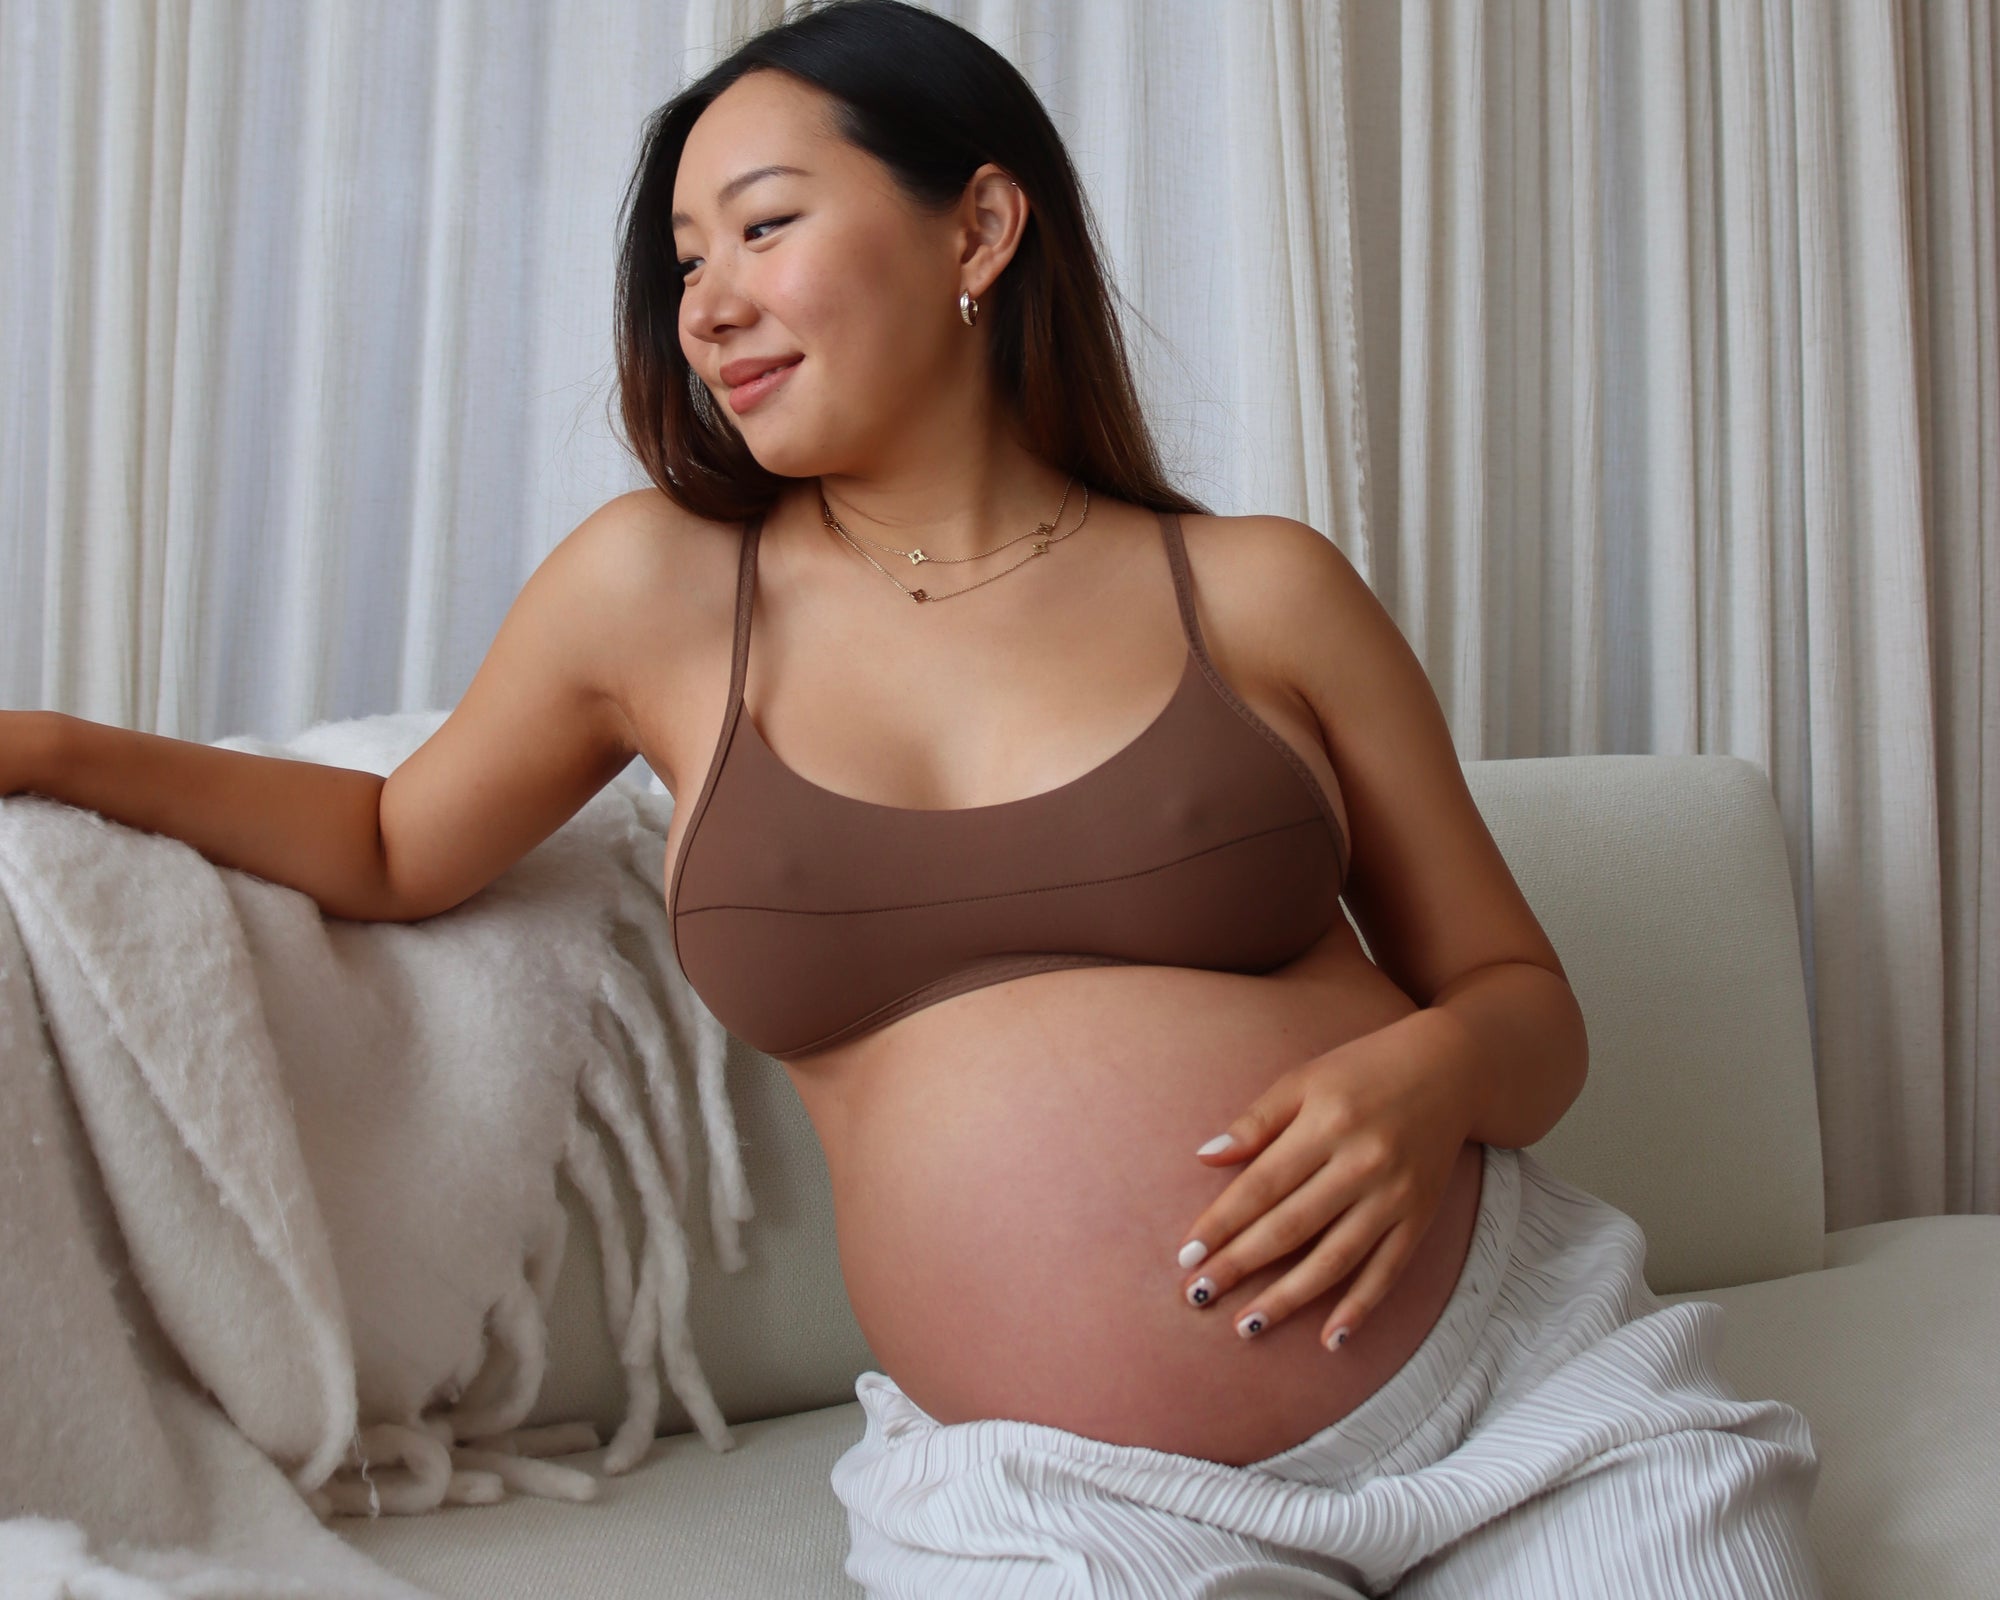 Pregnant woman sitting on a couch wearing the Scoop System in Brownz